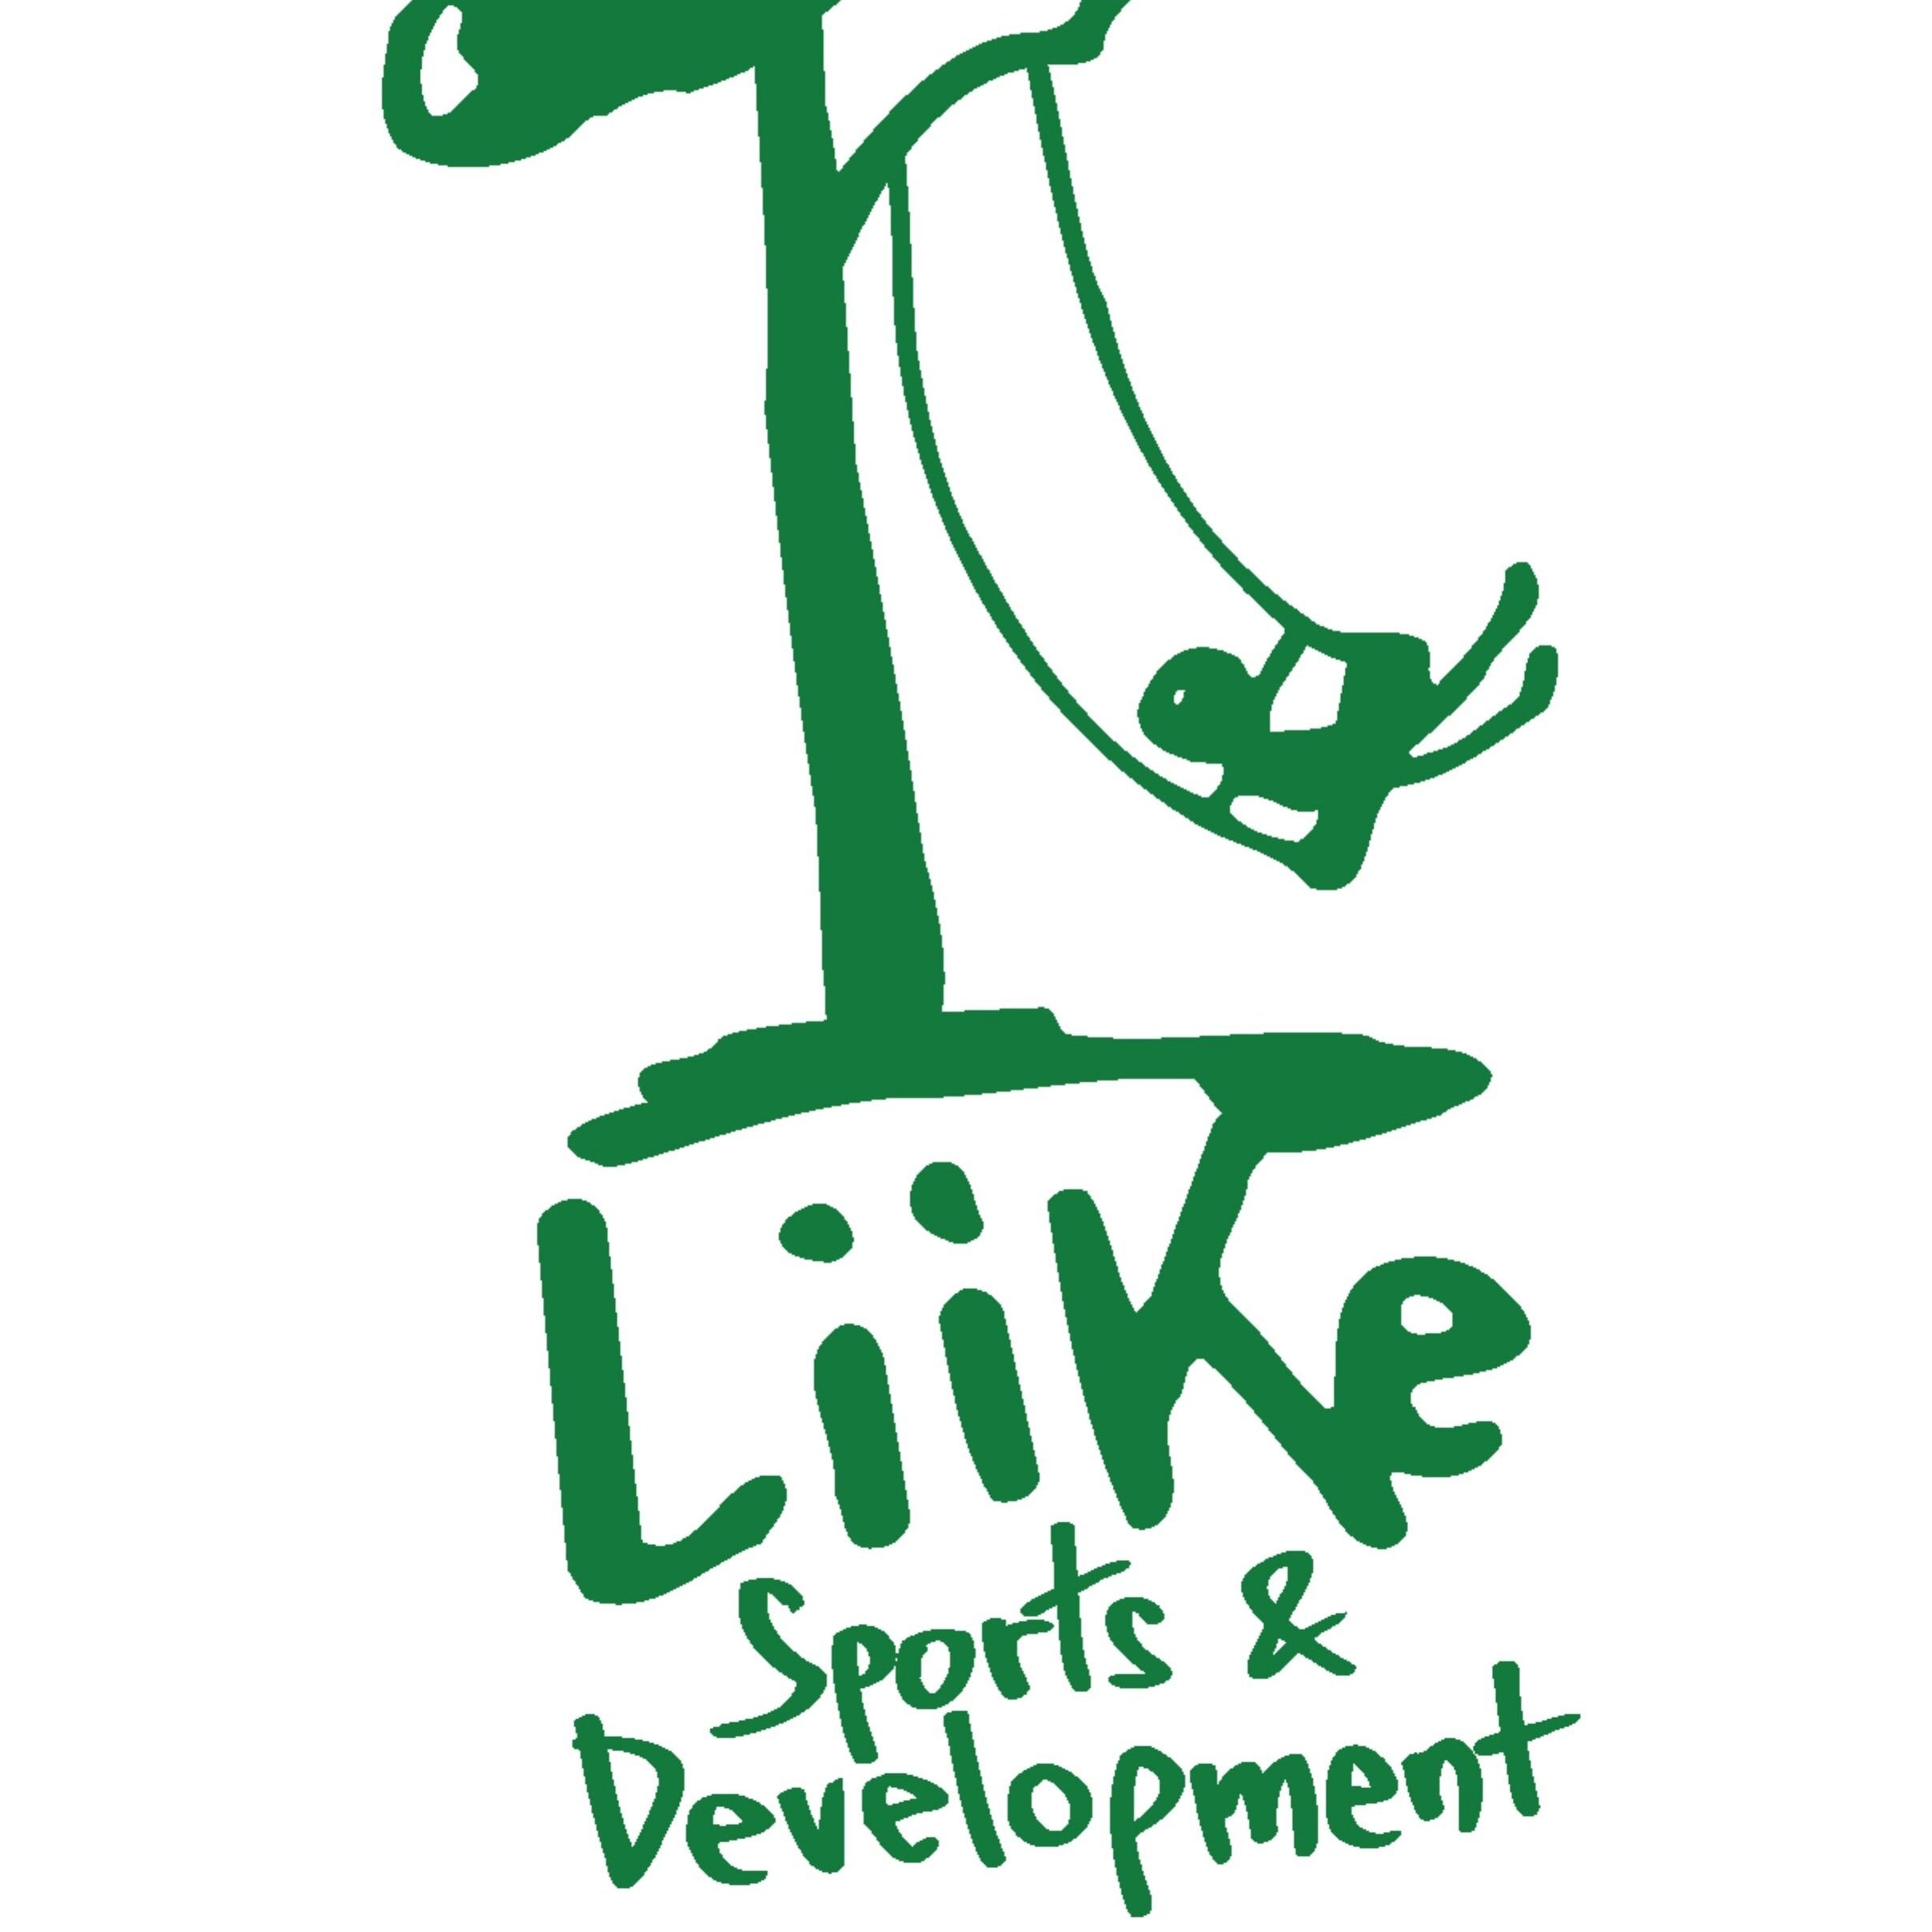 LiiKe is a Finnish sports & development NGO that uses sport and health education as a tool for sustainable development. https://t.co/wOMYaVxDZ4